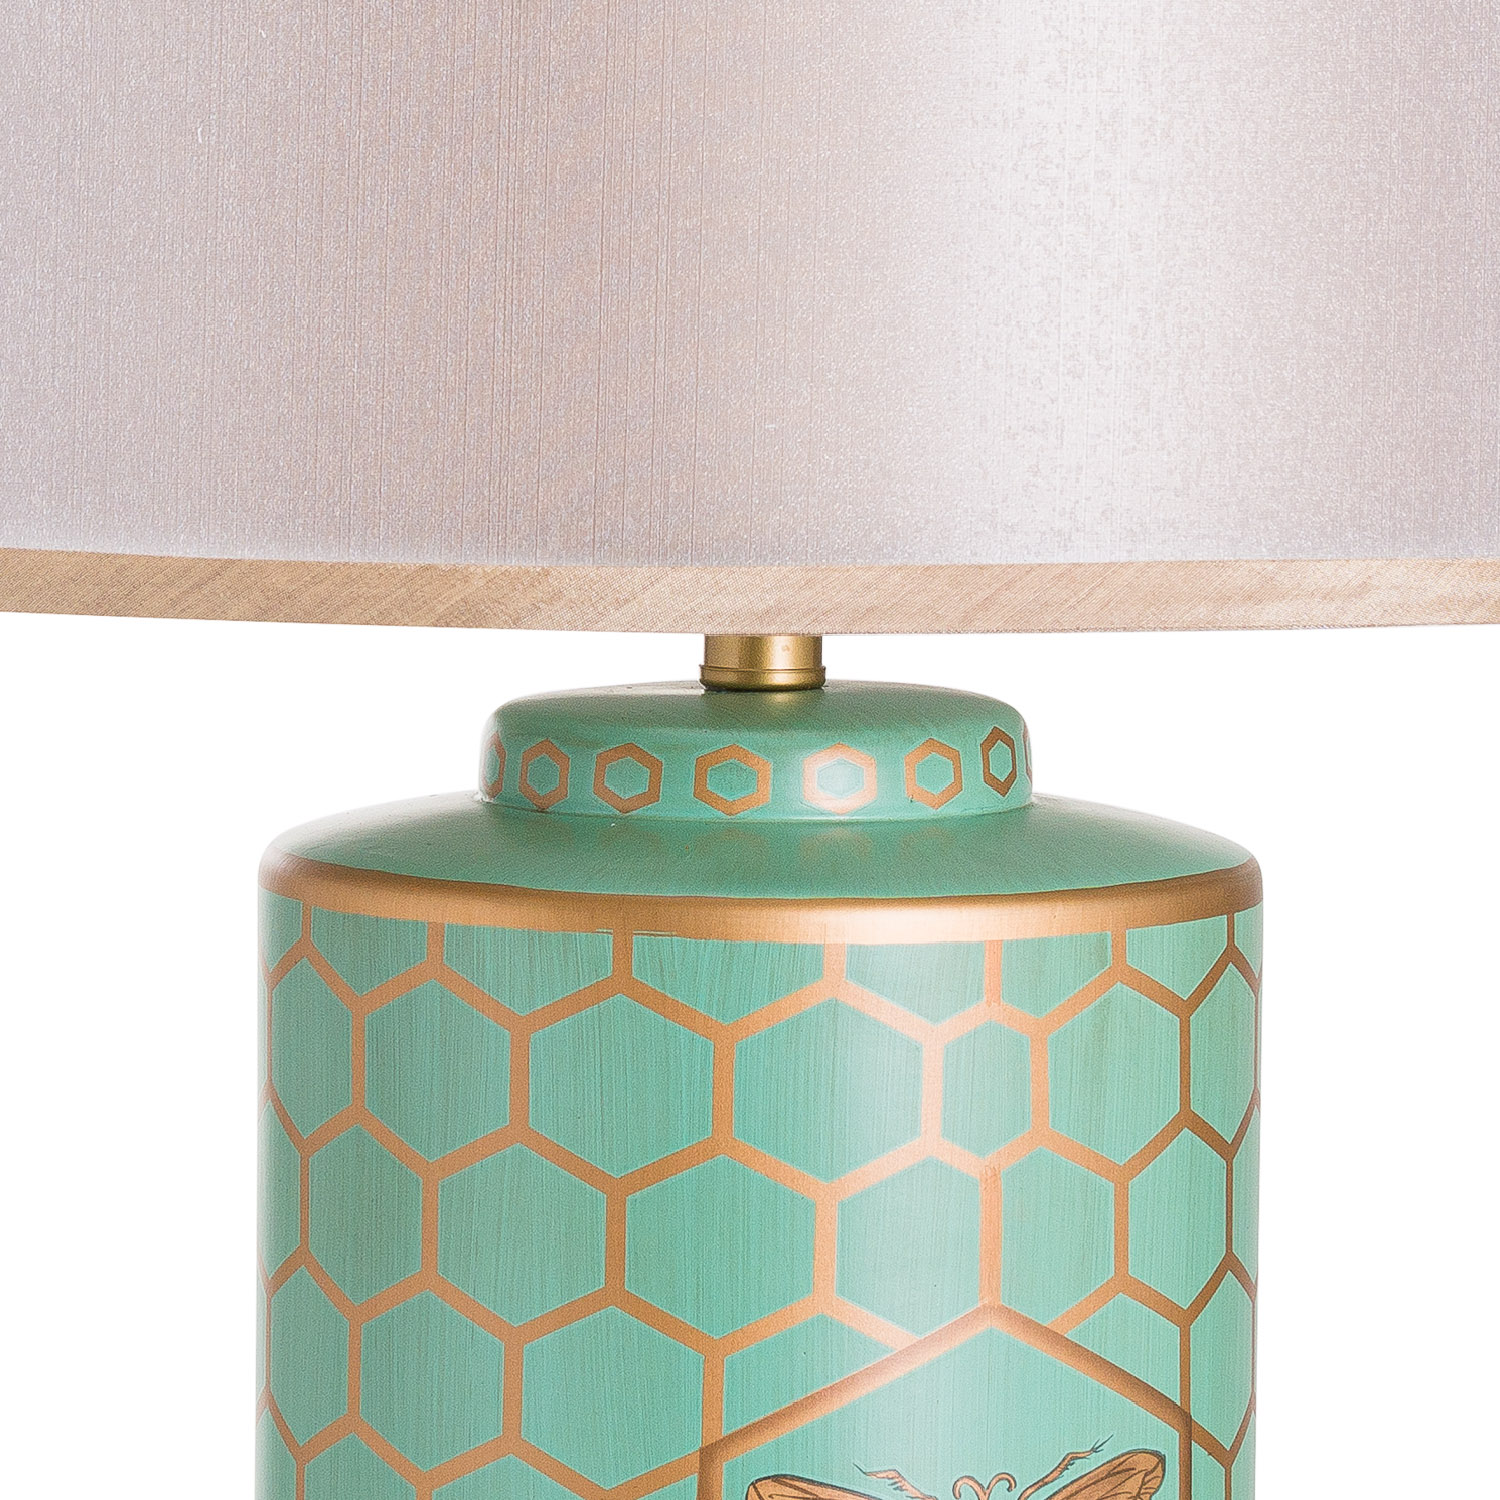 Harley Bee Table Lamp With Double Layer Shade - Image 2